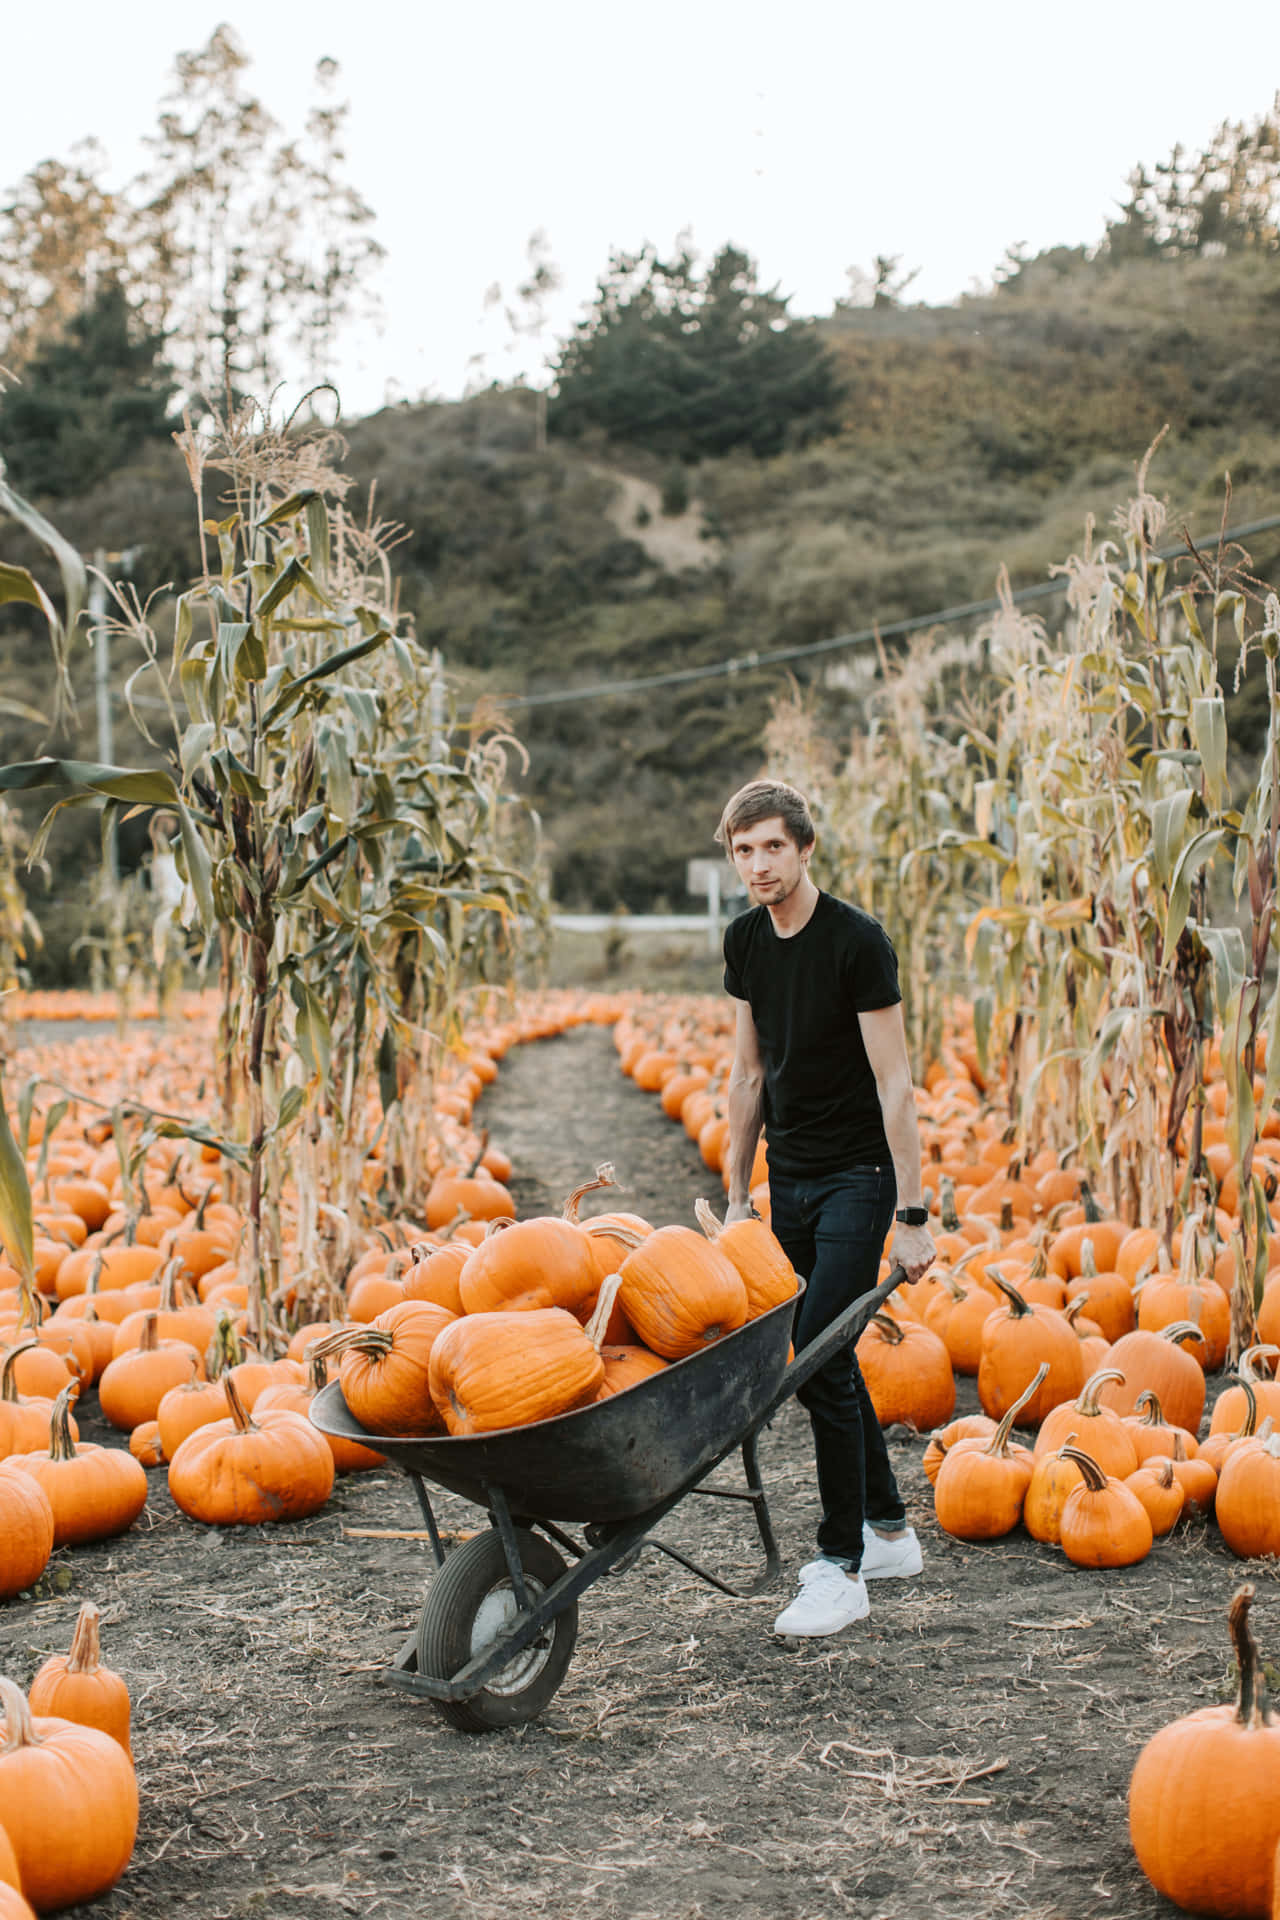 Man With A Wheelbarrow At Pumpkin Patch Picture